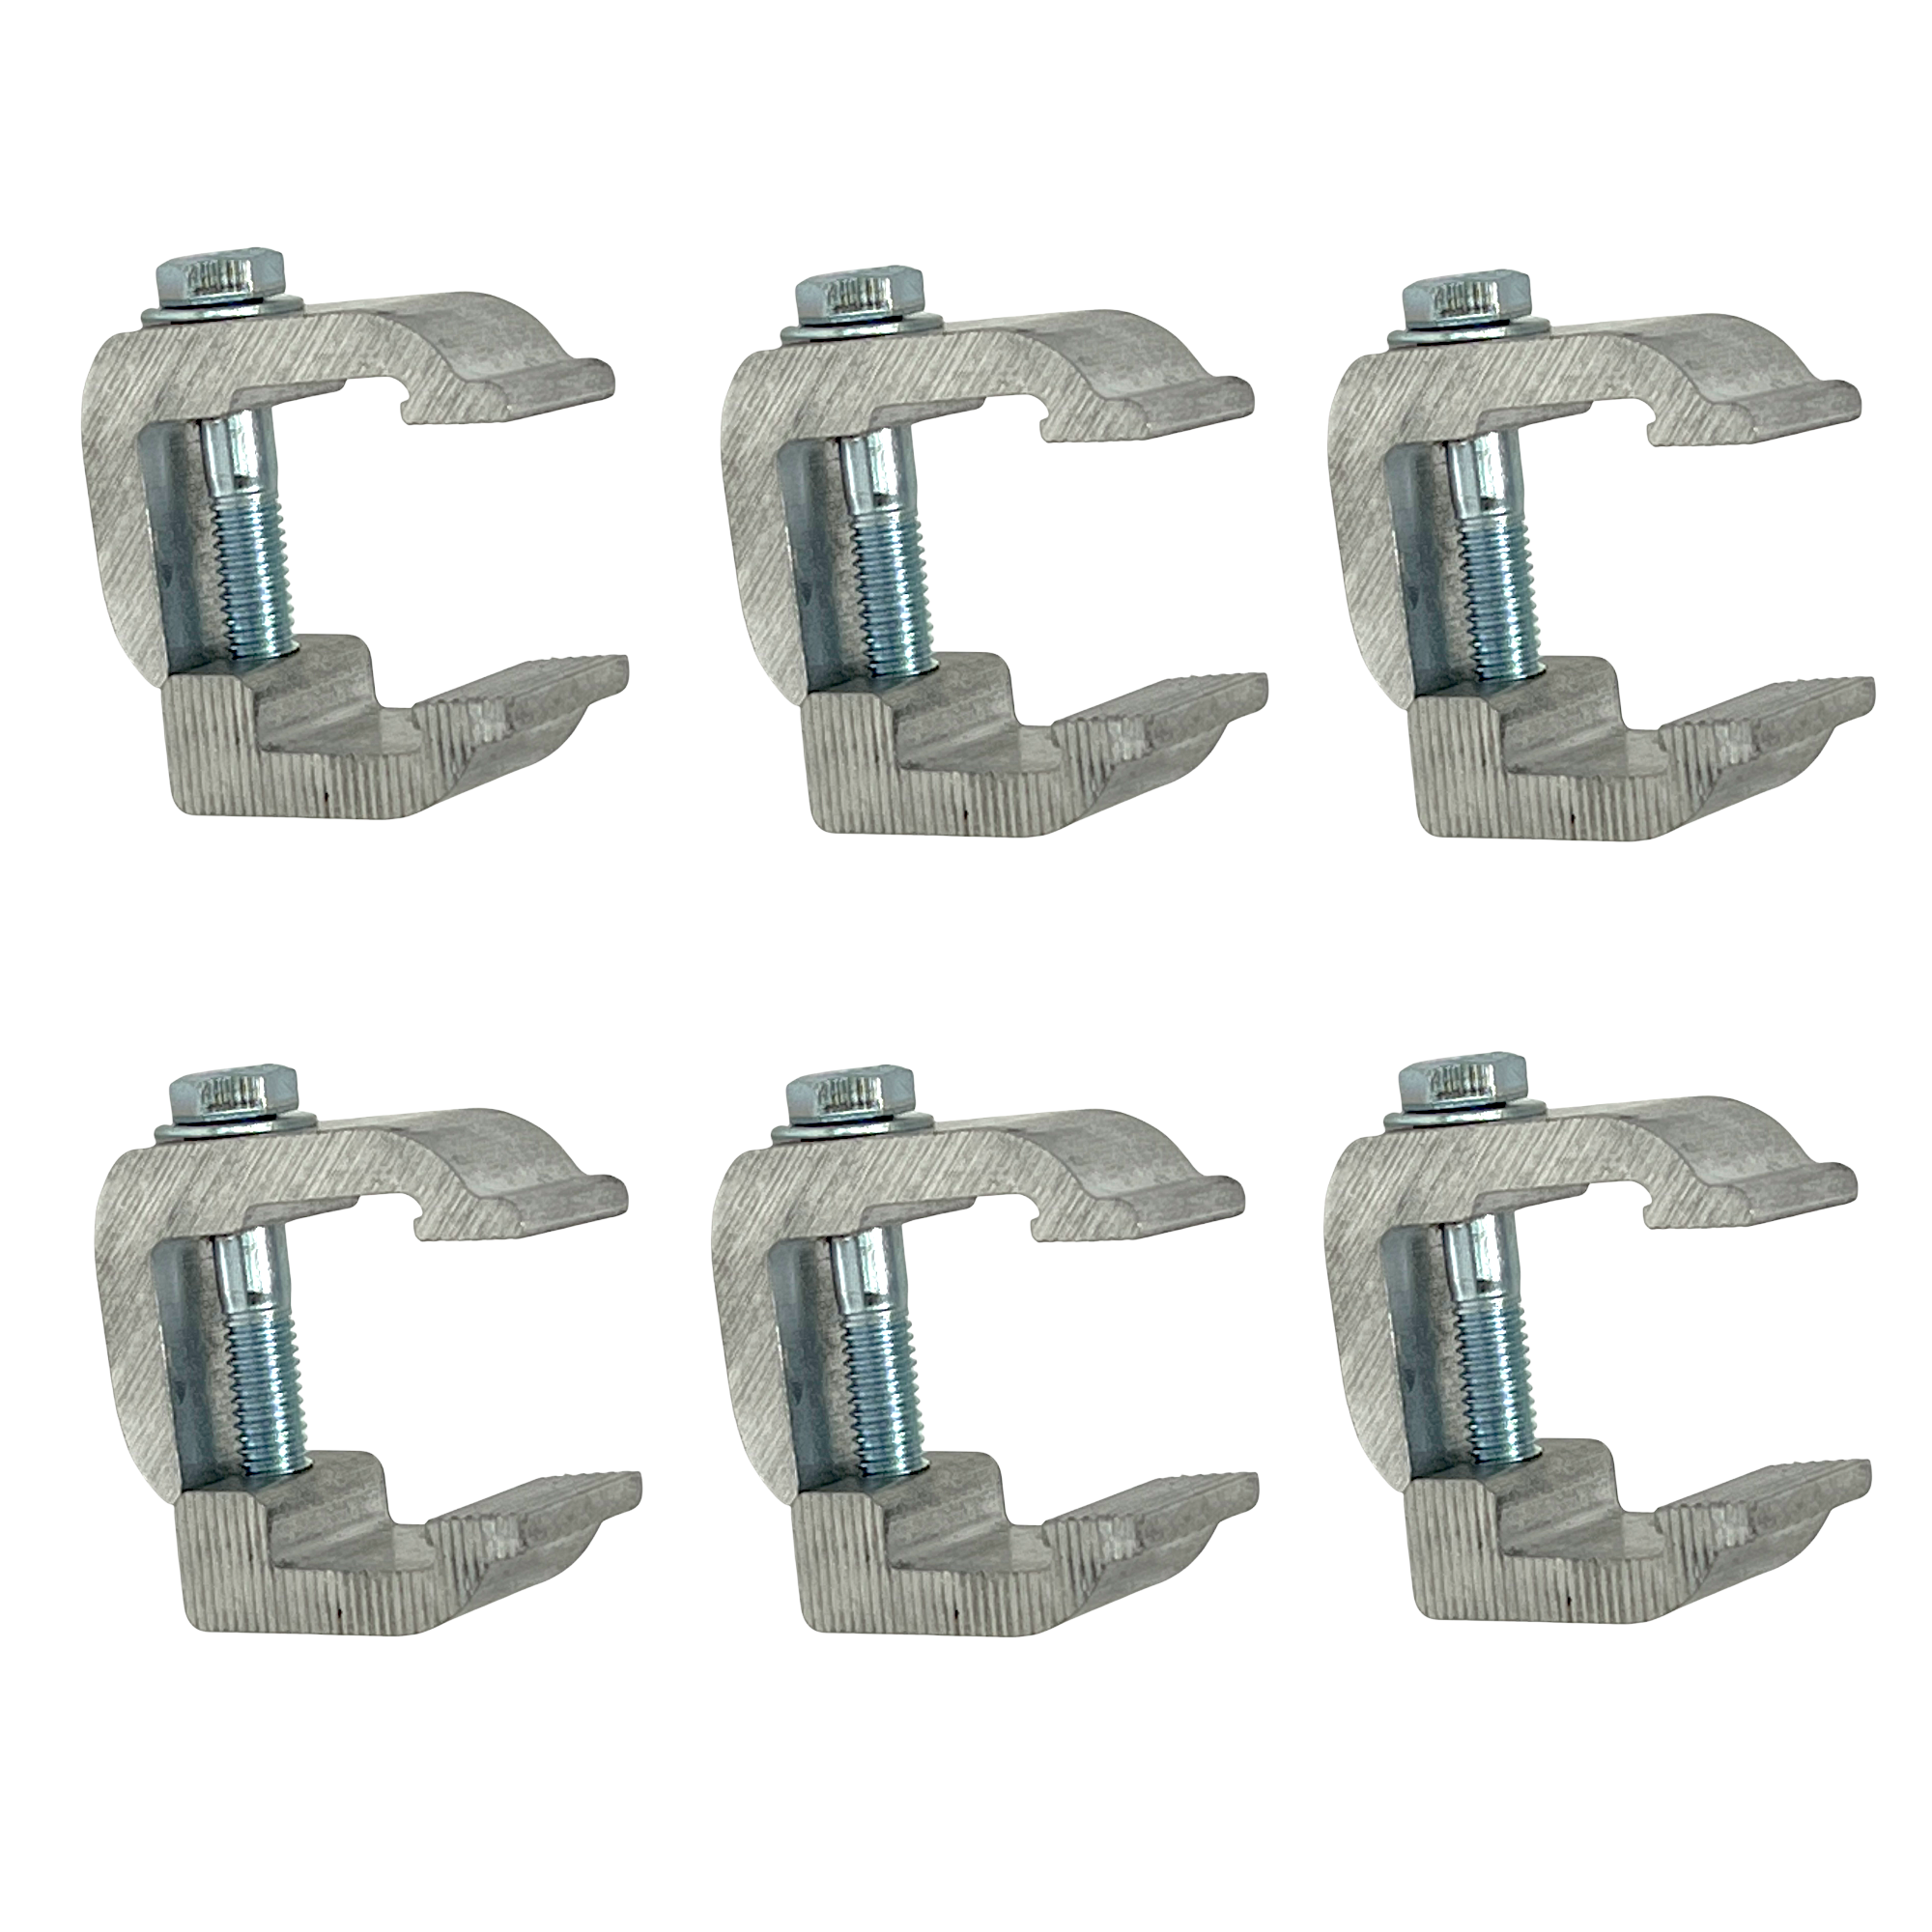 GCi STRONGER BY DESIGN G-16 Pinch Clamps for Select Tonneau Covers (6 Pack)